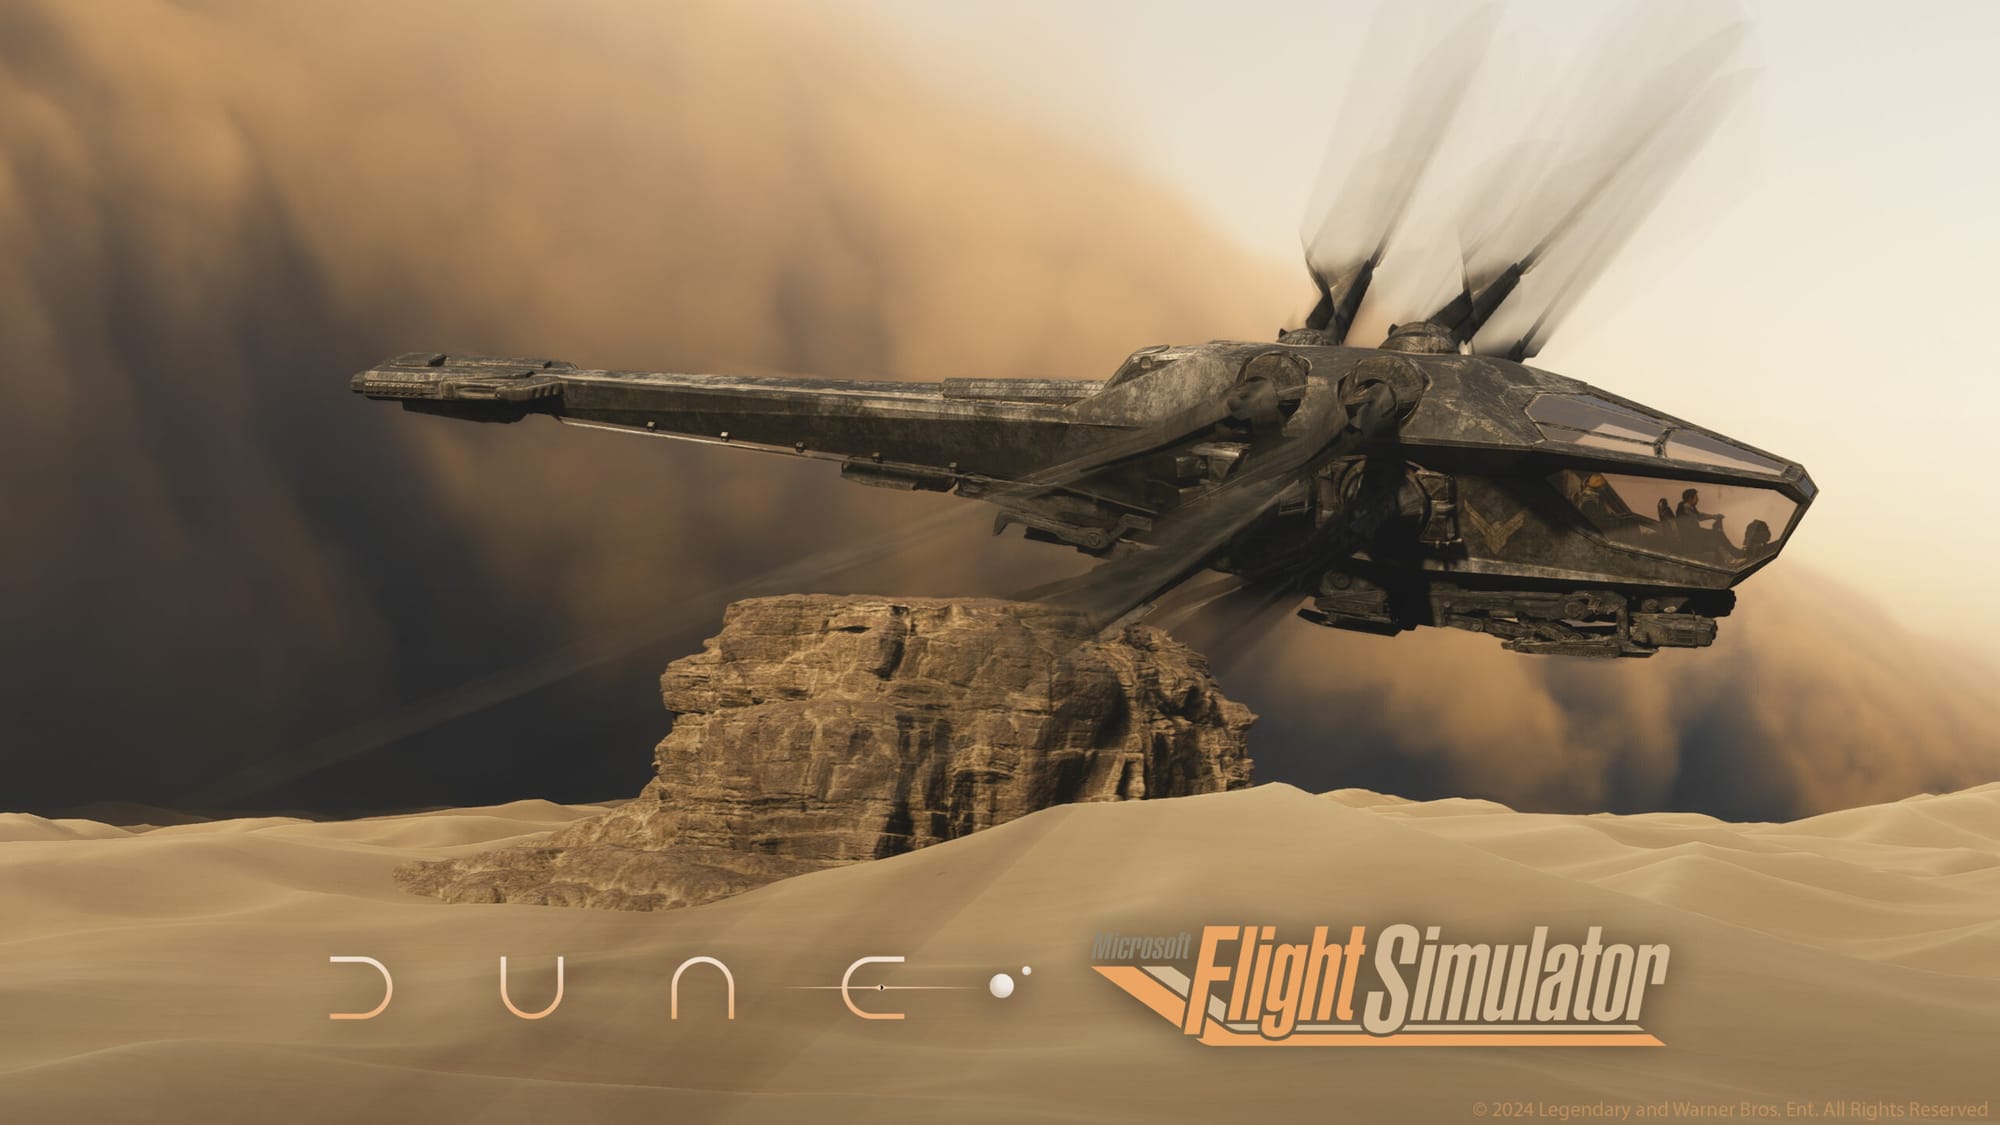 Promo image of an Ornithopter above the surface of Arrakis with the Dune and Flight Simulator logos.